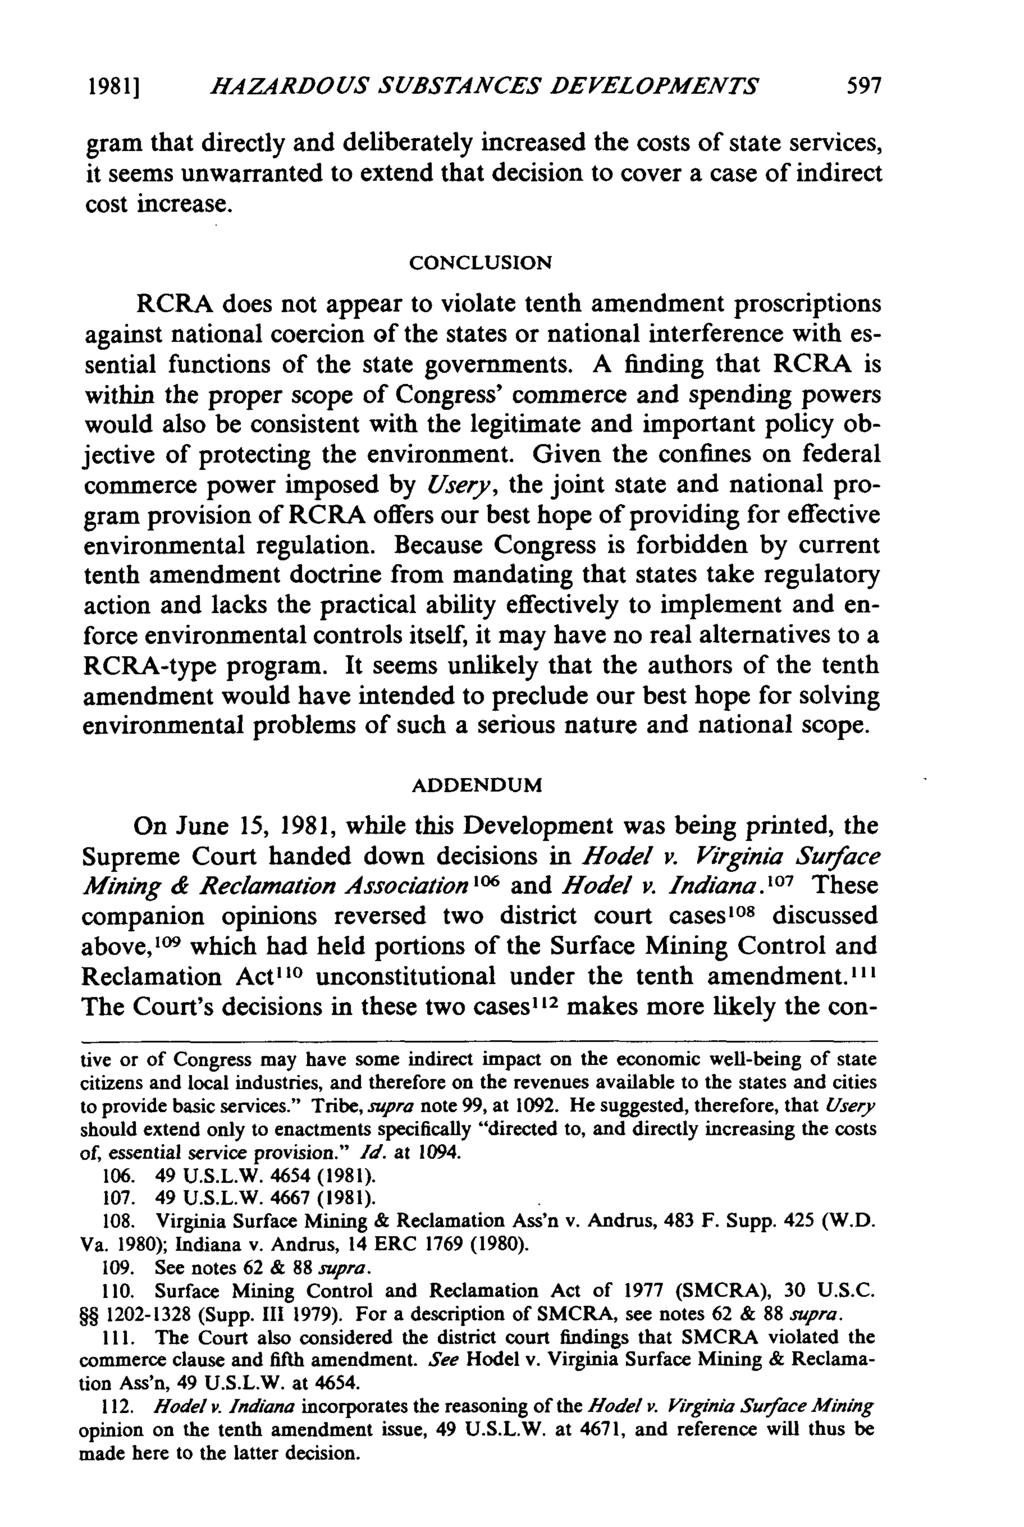 19811 HAZARDOUS SUBSTANCES DEVELOPMENTS gram that directly and deliberately increased the costs of state services, it seems unwarranted to extend that decision to cover a case of indirect cost